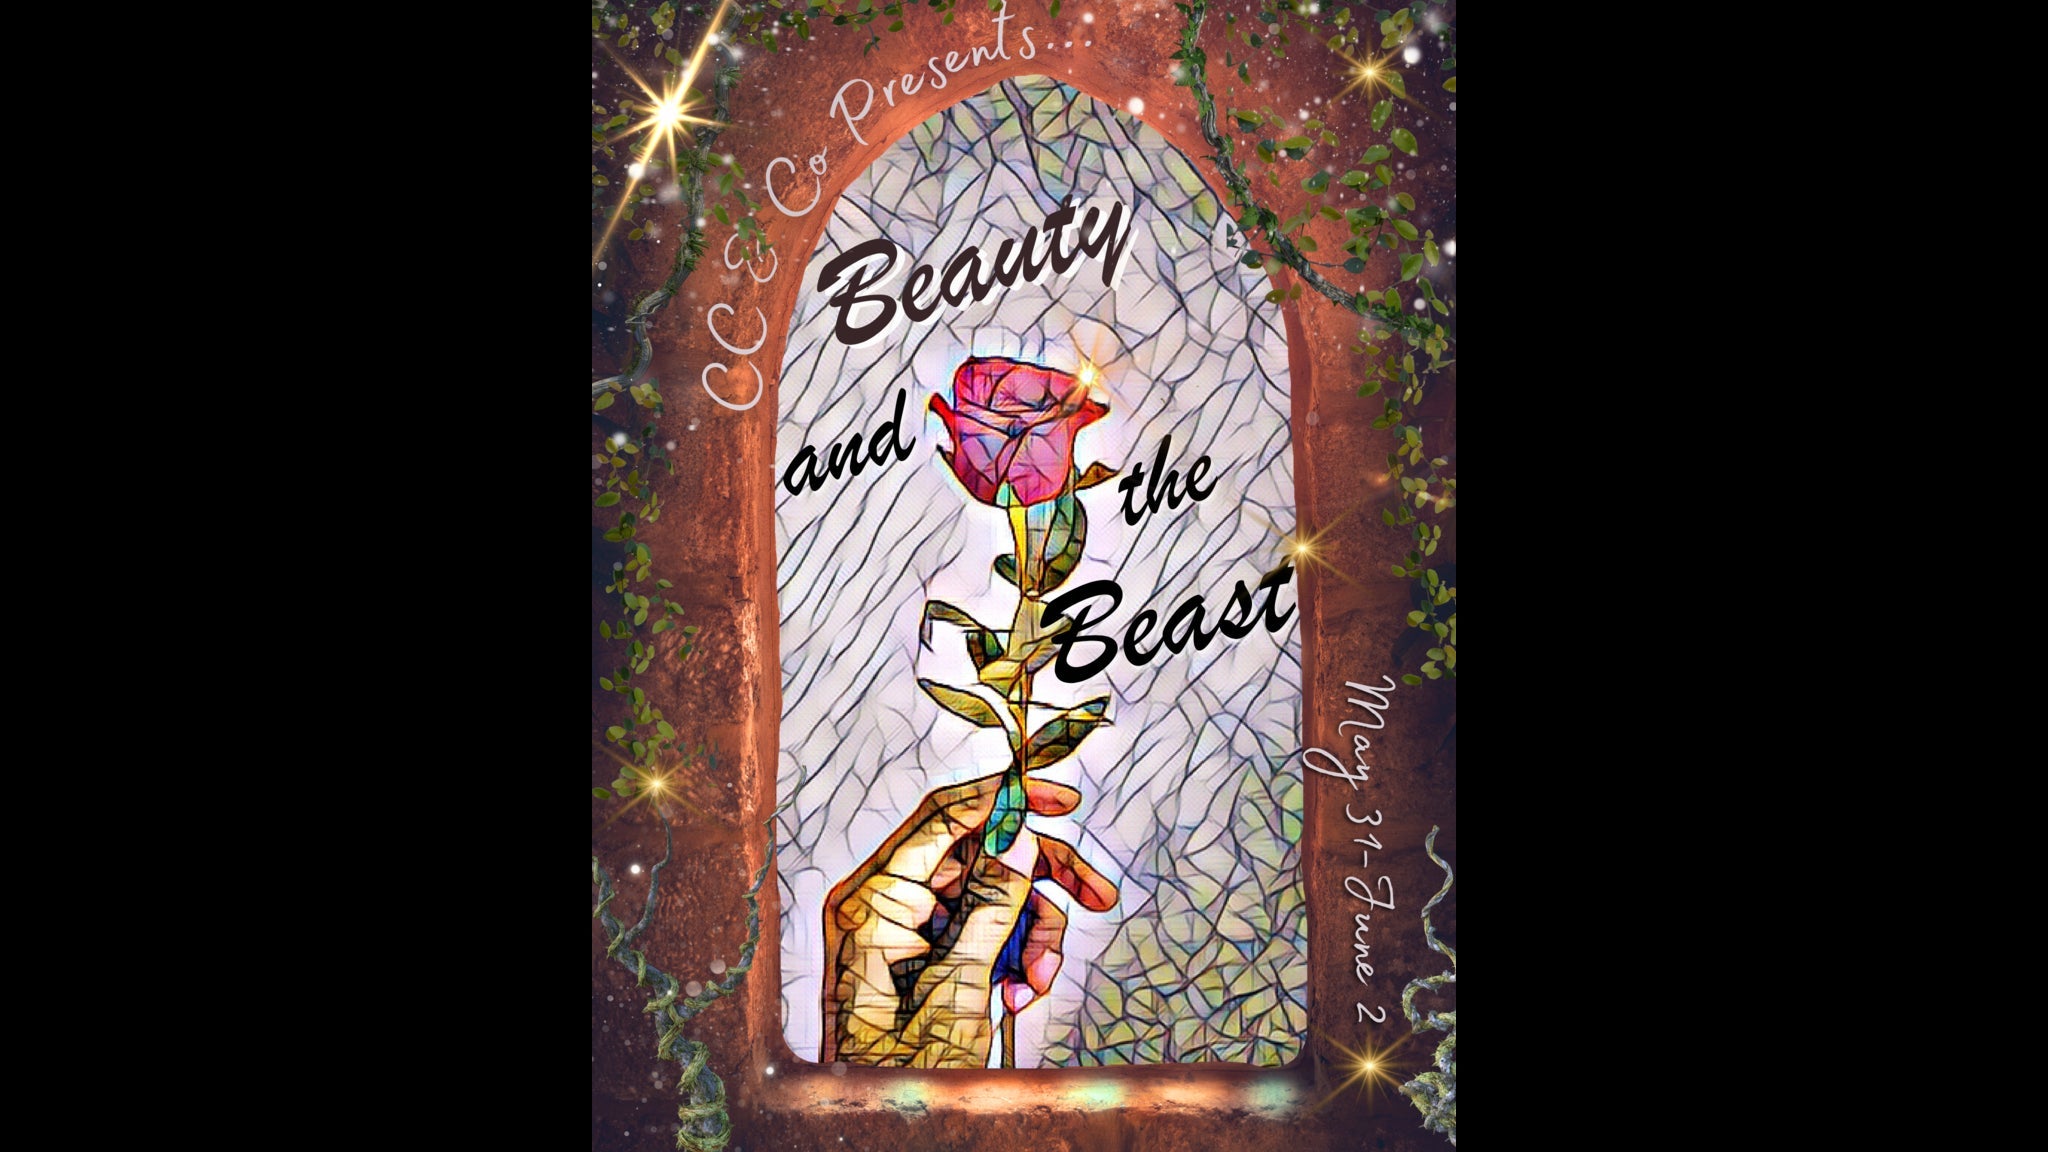 CC & CO - Beauty and The Beast - Red Gala